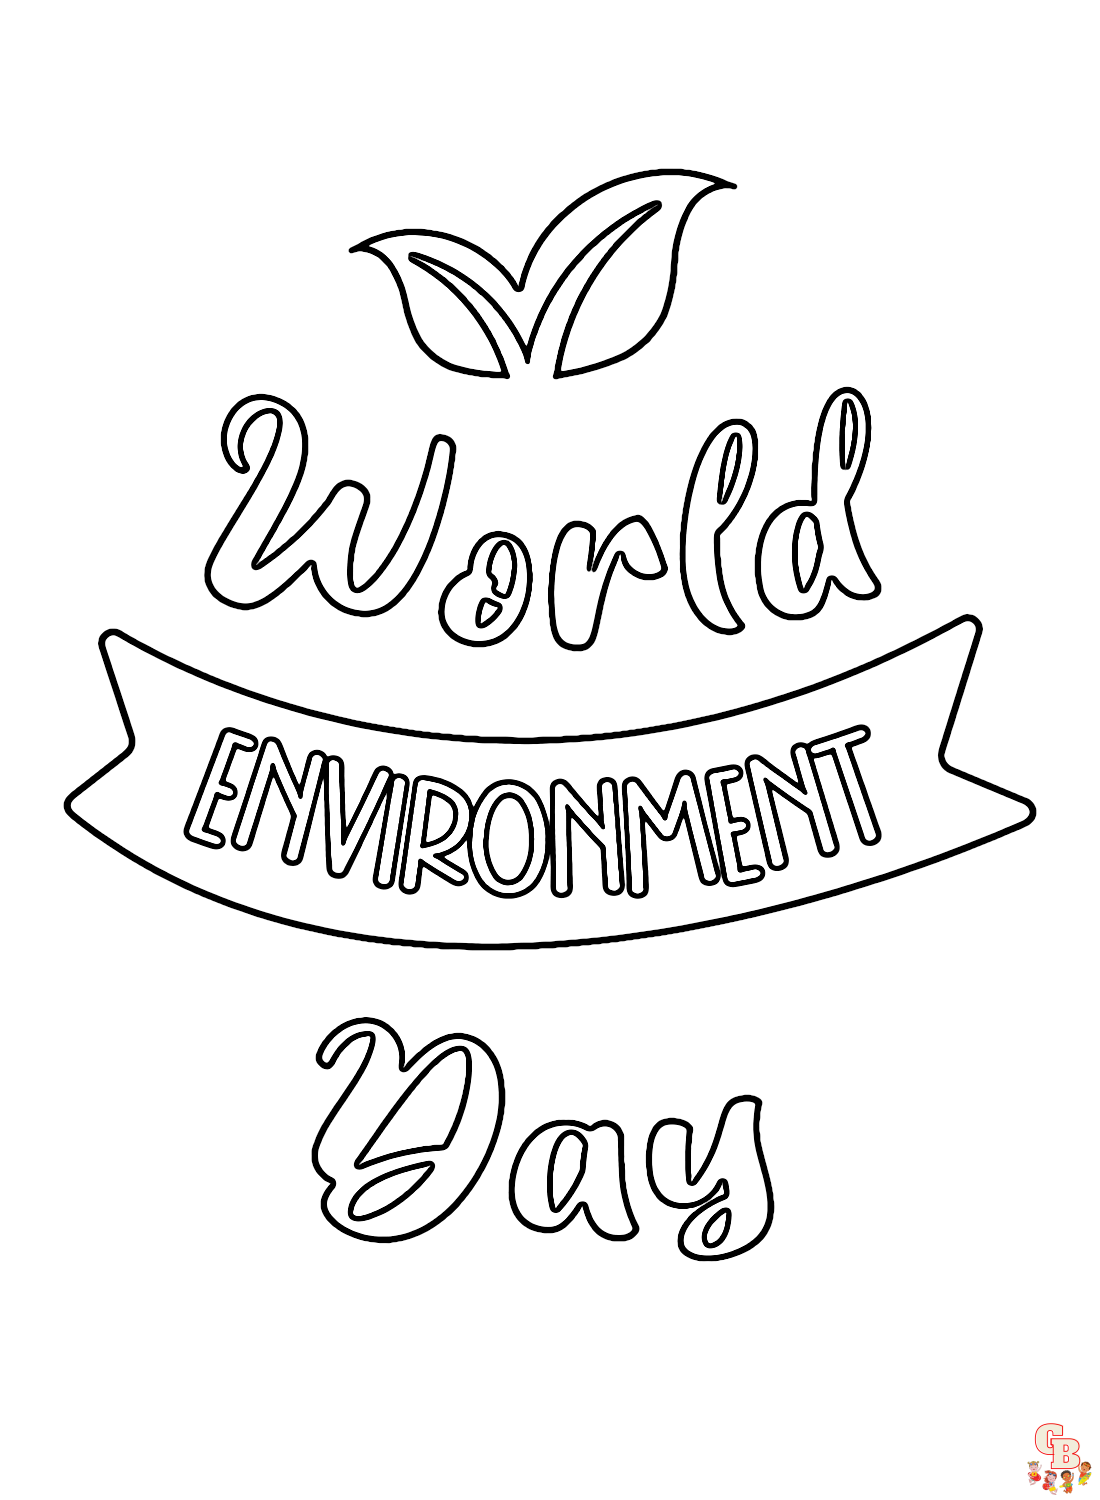 Free world environment day coloring pages for kids